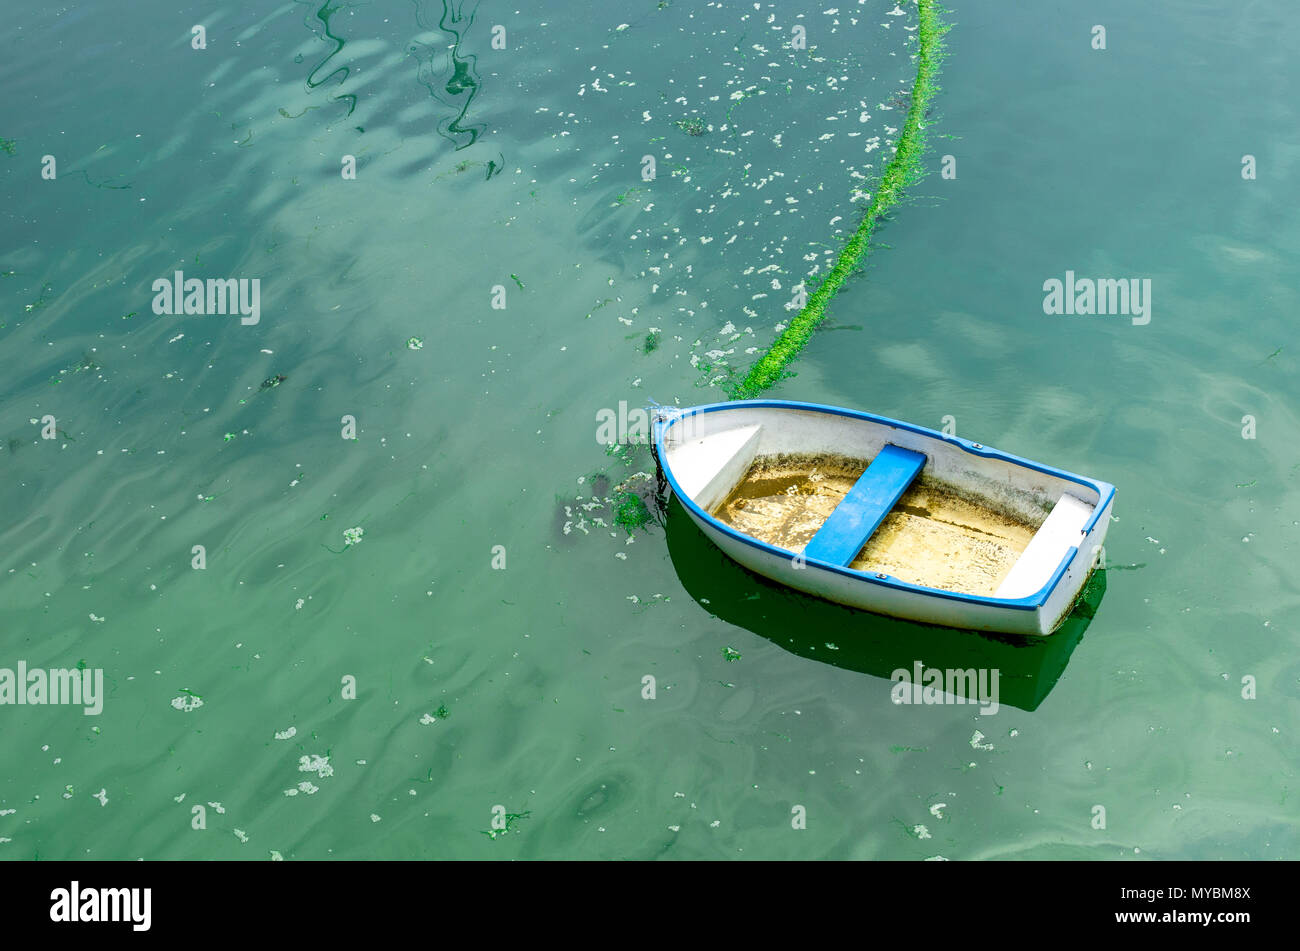 A wooden boat on turquoise waters Stock Photo